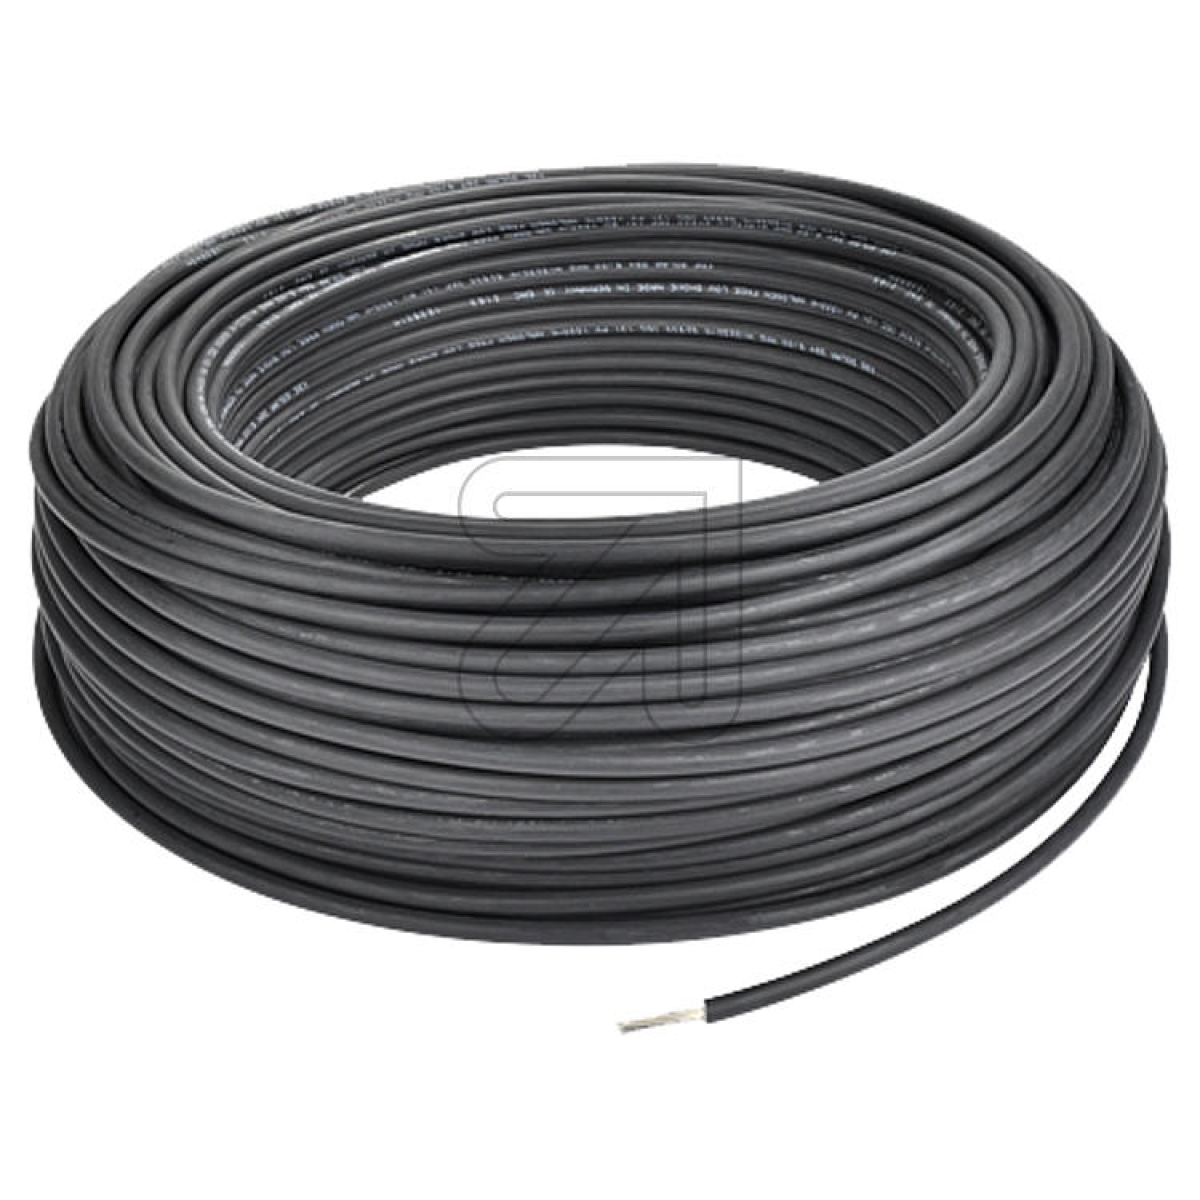 Engel Lighting GmbH50m solar cable H1Z2Z2-K 6mm², PV cable 100022-Price for 50 pcs.Article-No: 050145